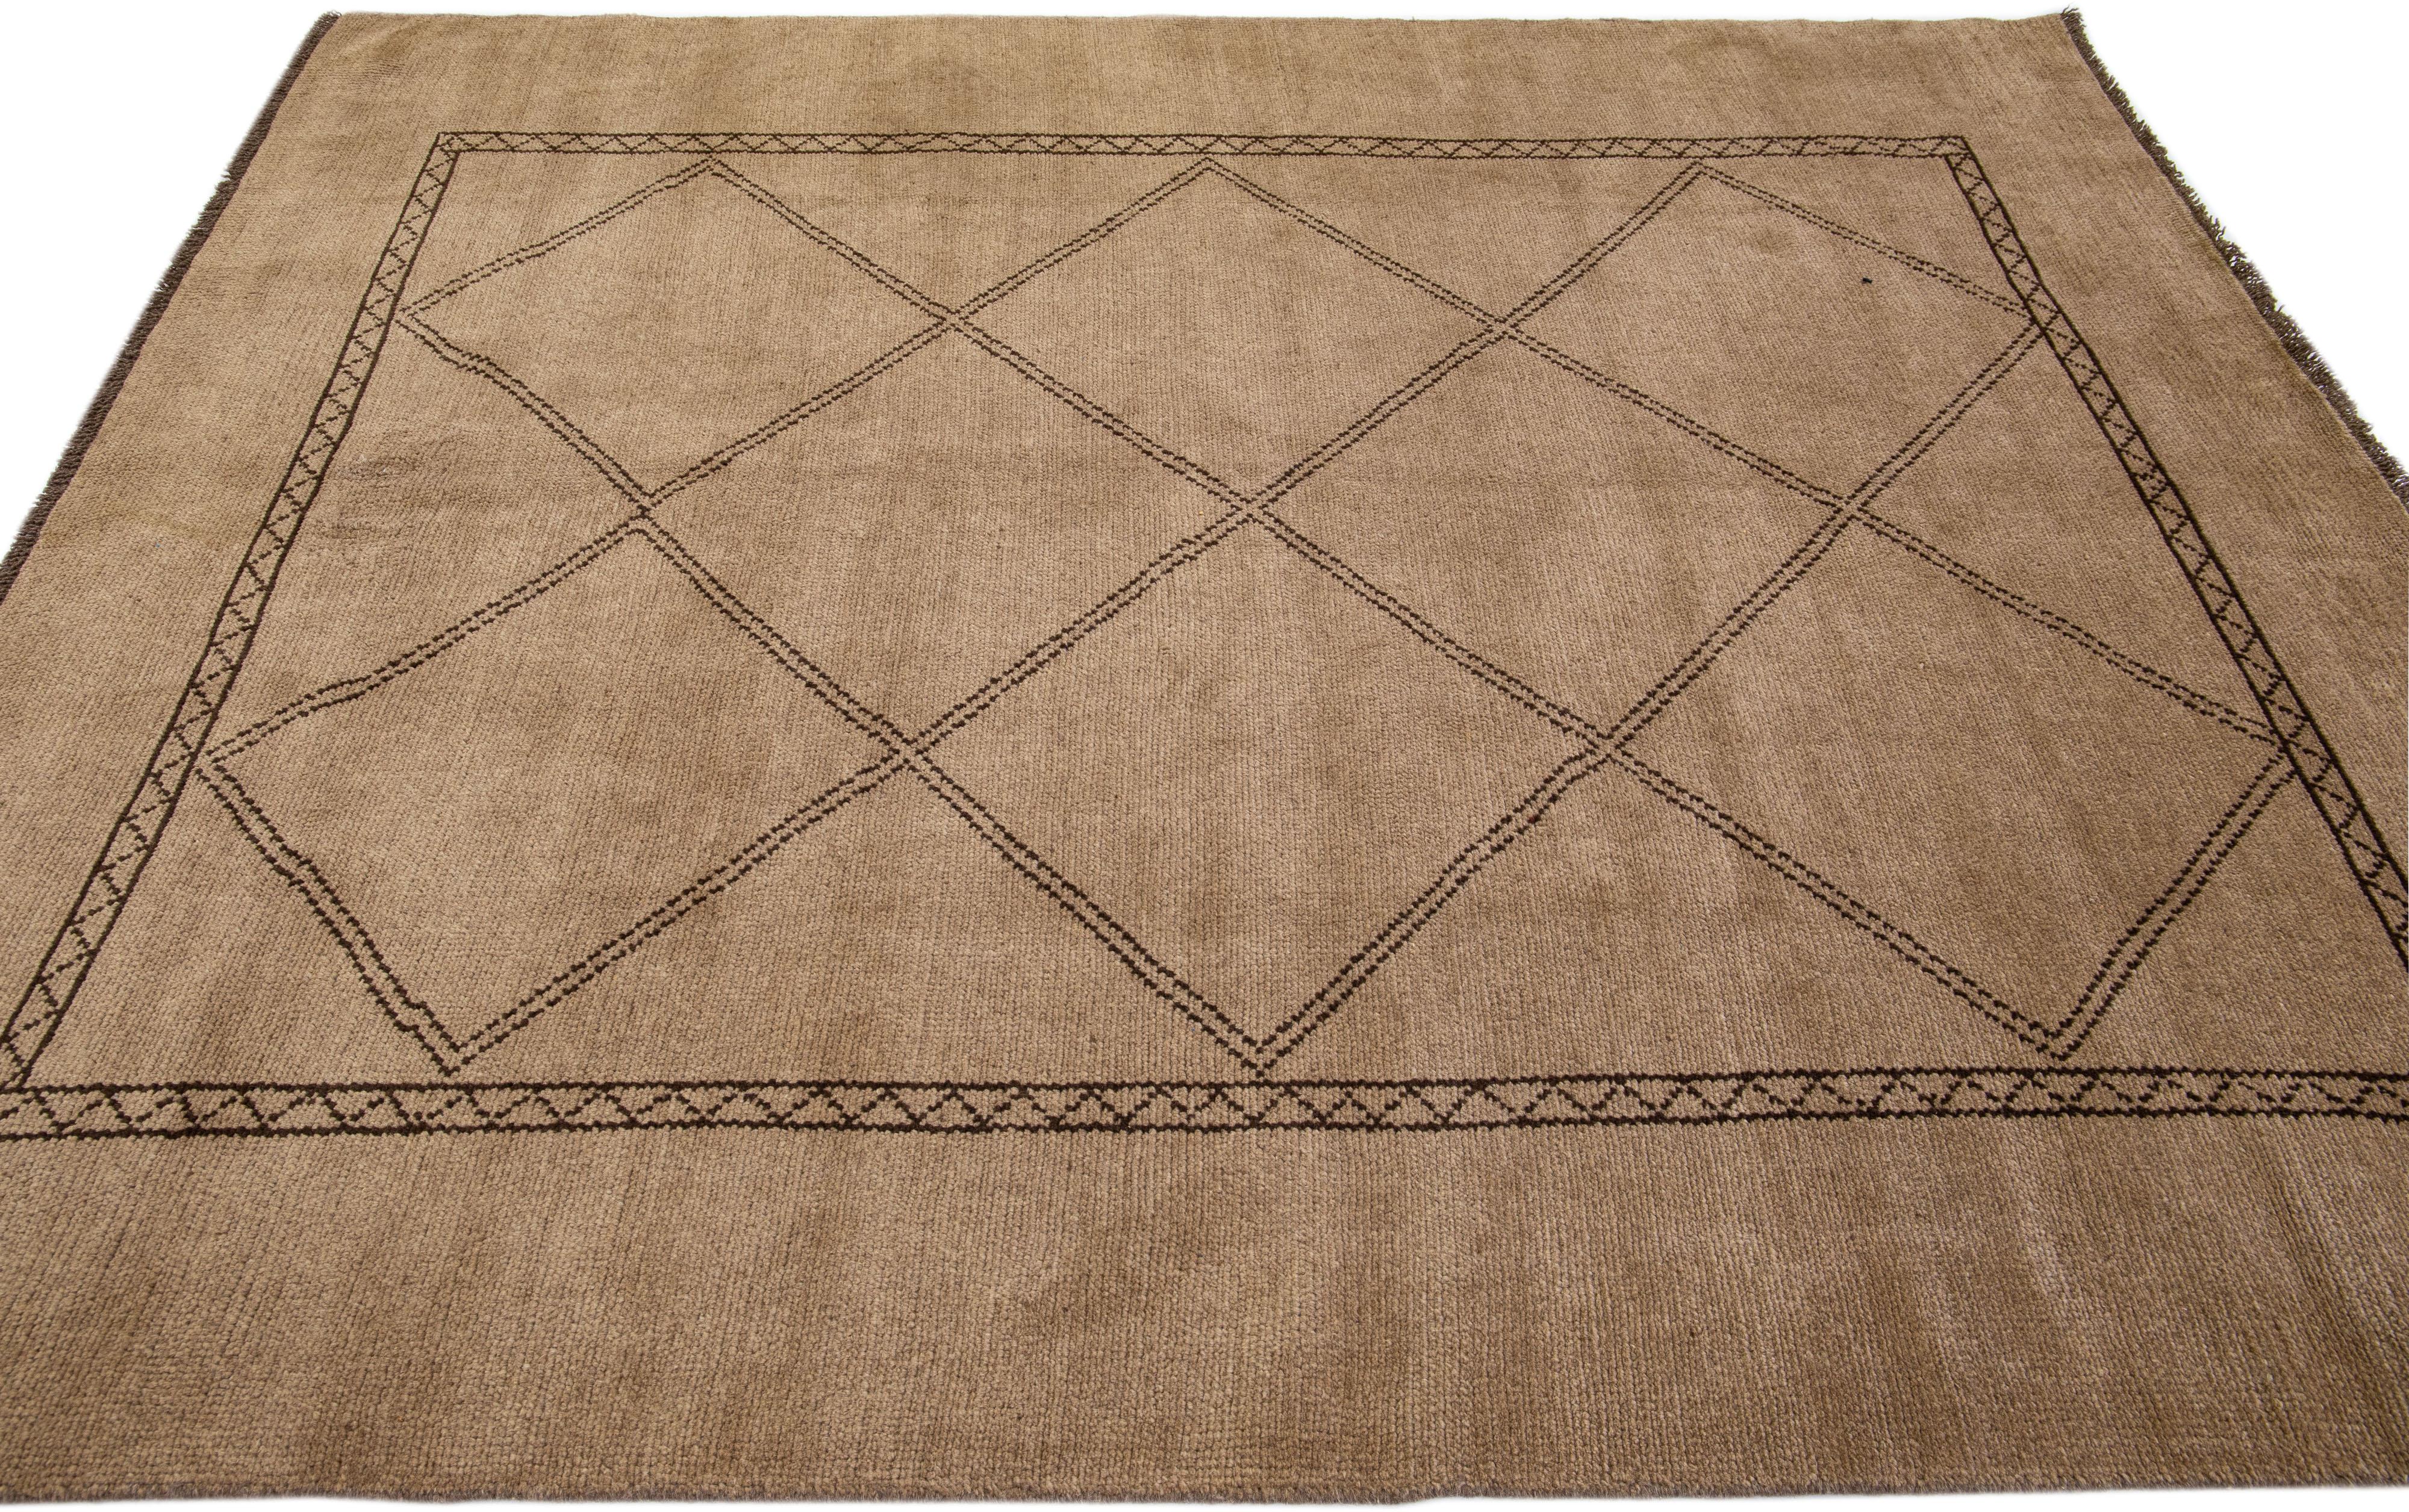 Brown Modern Moroccan Style Handmade Tribal Motif Wool Rug by Apadana In New Condition For Sale In Norwalk, CT